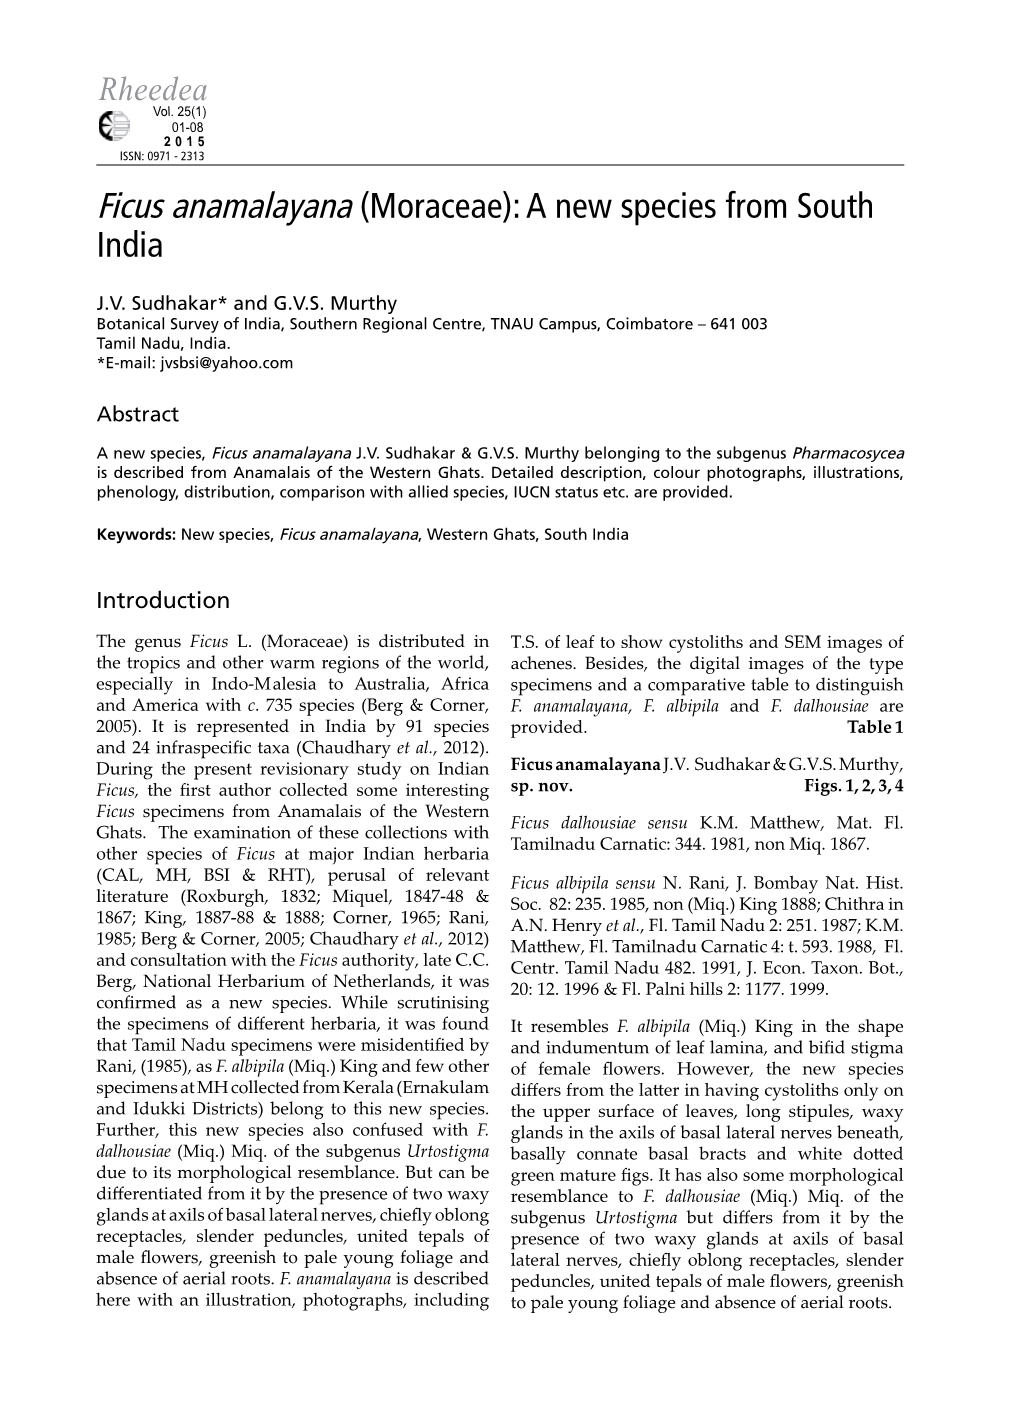 Ficus Anamalayana (Moraceae): a New Species from South India